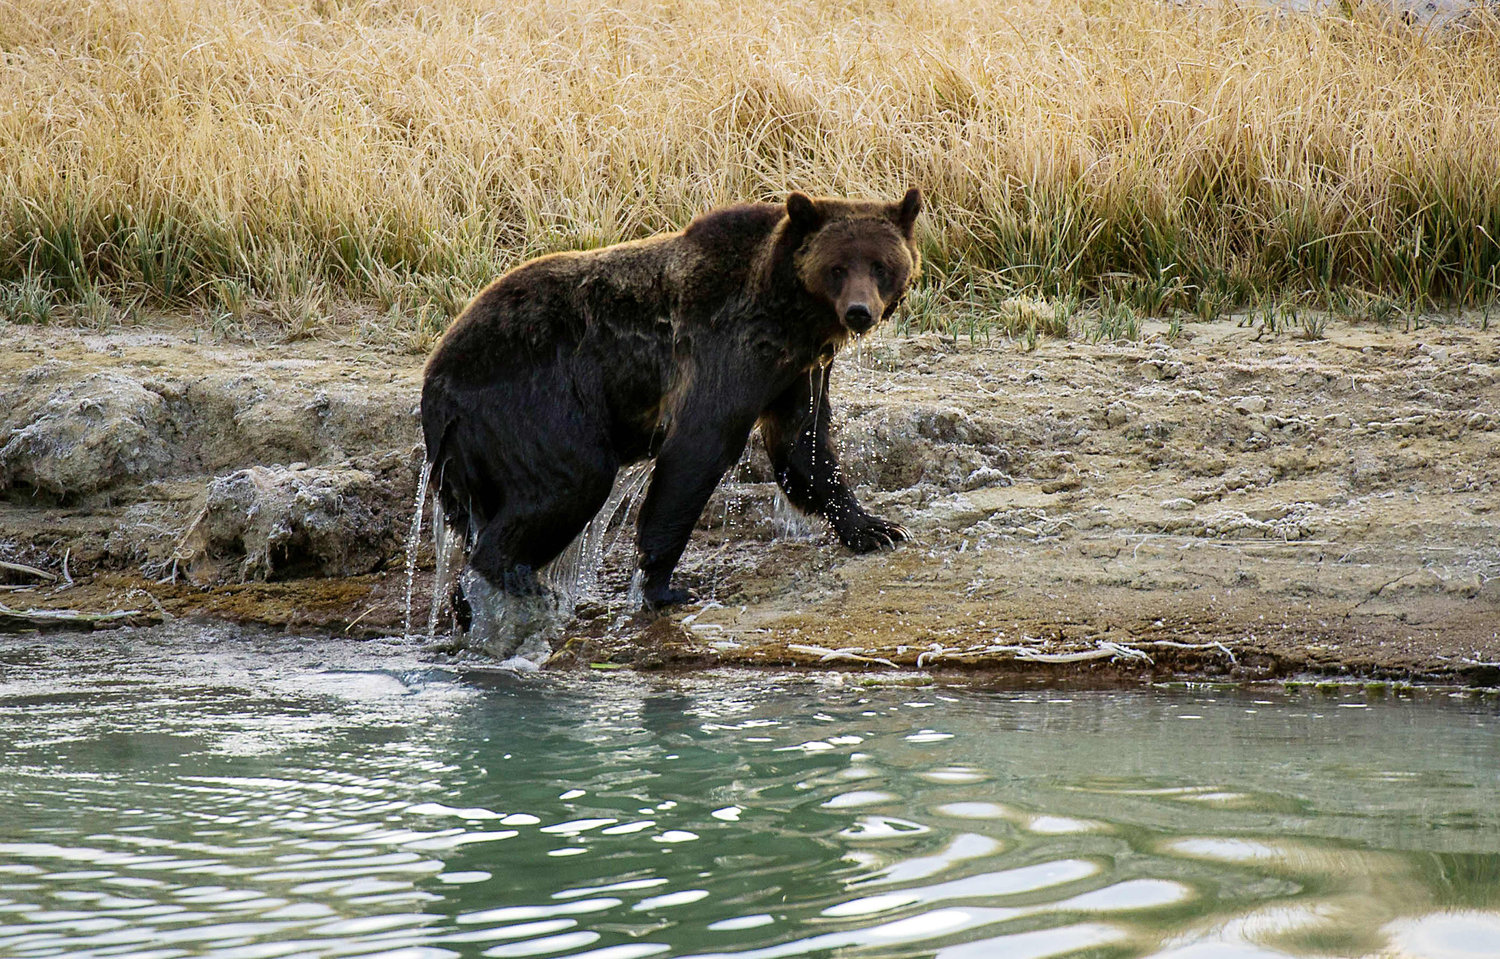 A female Grizzly bear exits Pelican Creek in 2012 in the Yellowstone National Park in Wyoming. (Karen Bleier/AFP/Getty Images/TNS)